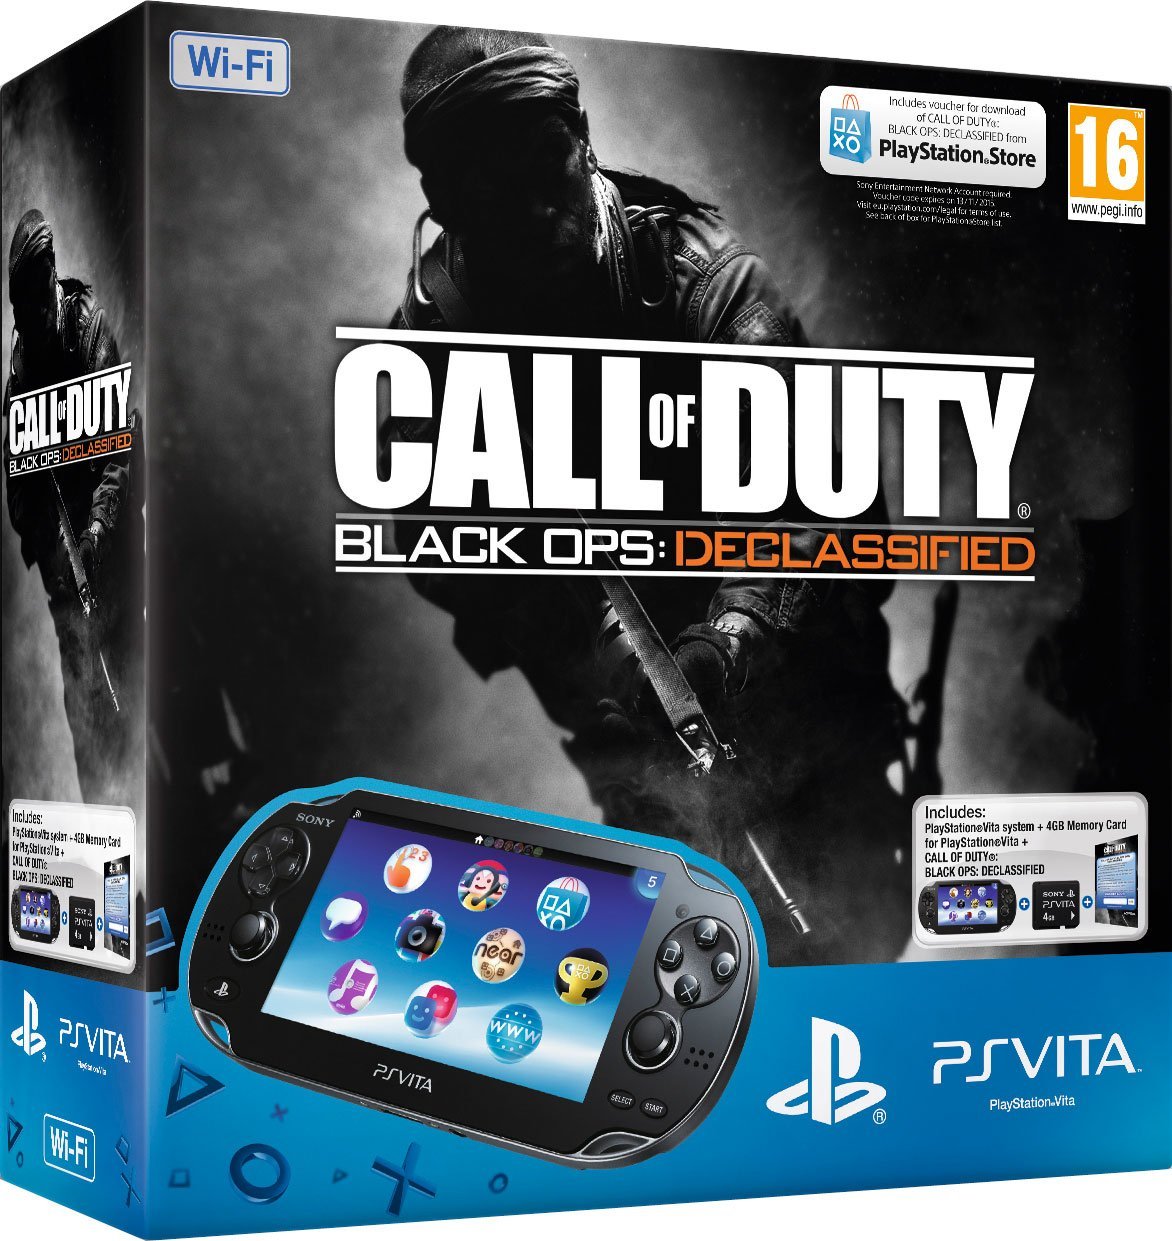 PlayStation Vita WiFi Call of Duty: Black Ops Declassified and 4GB card